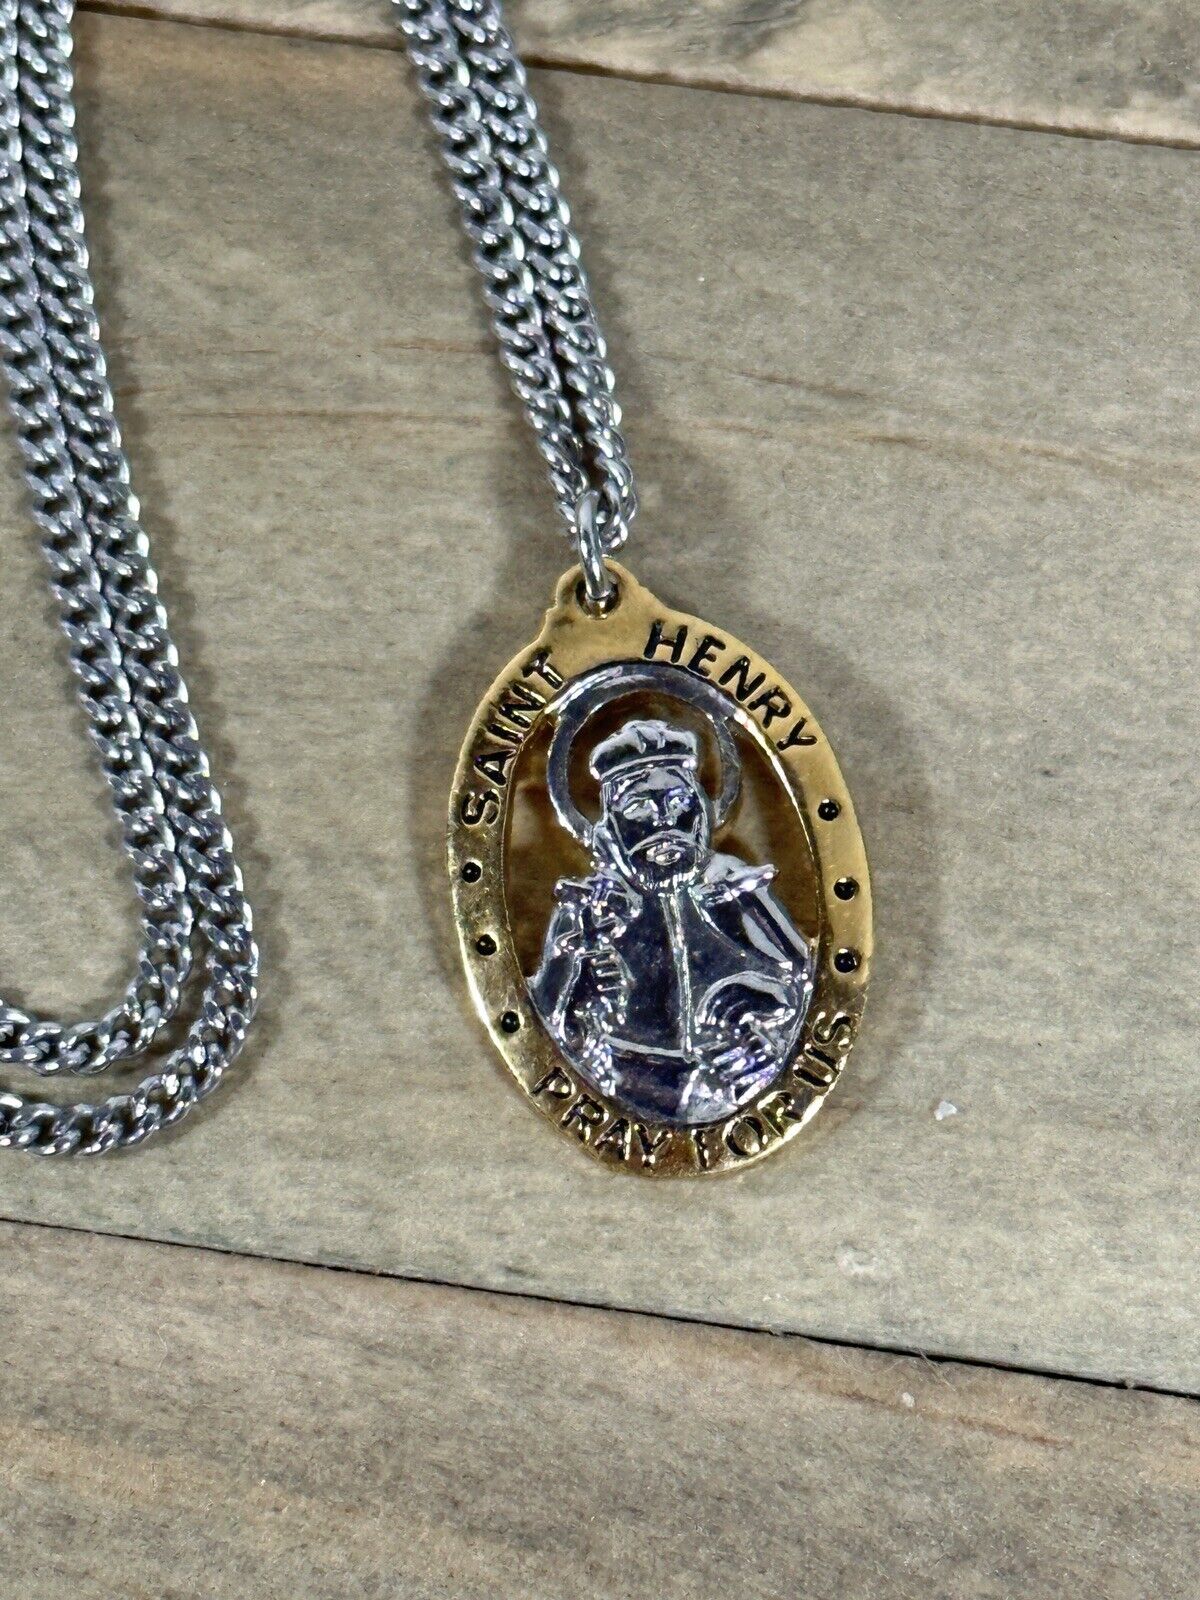 St. Henry Medal Necklace Silver/Gold Patron Childless/Handicapped, Confirmation